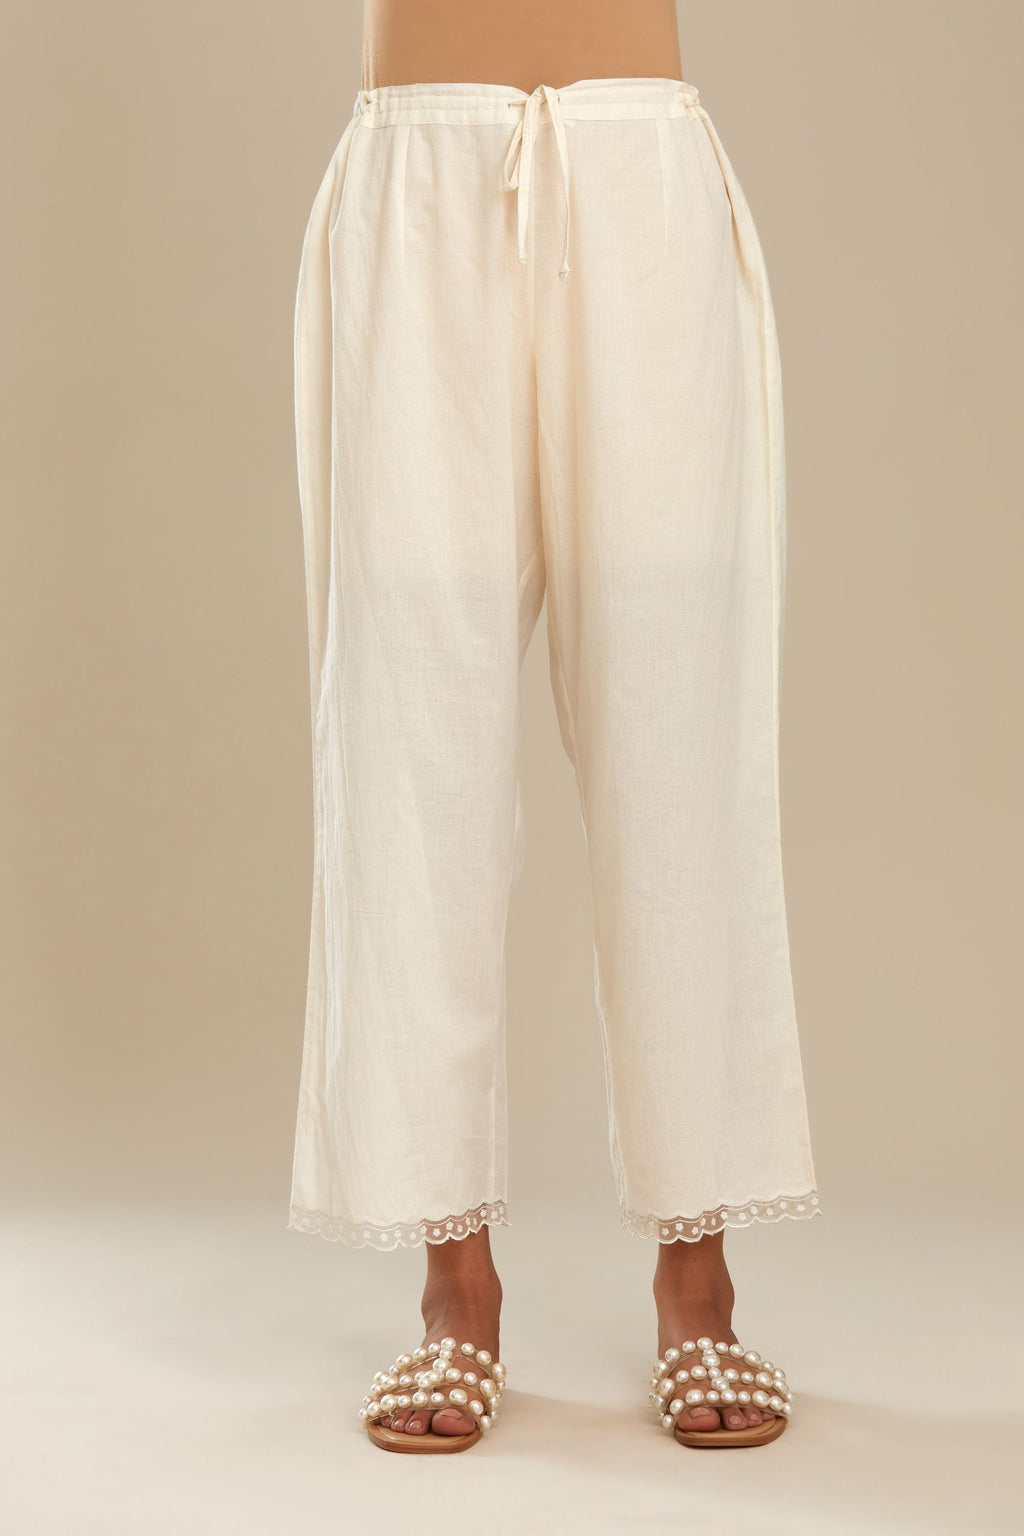 Off white straight pants with scalloped embroidery at bottom hem. (Pants)